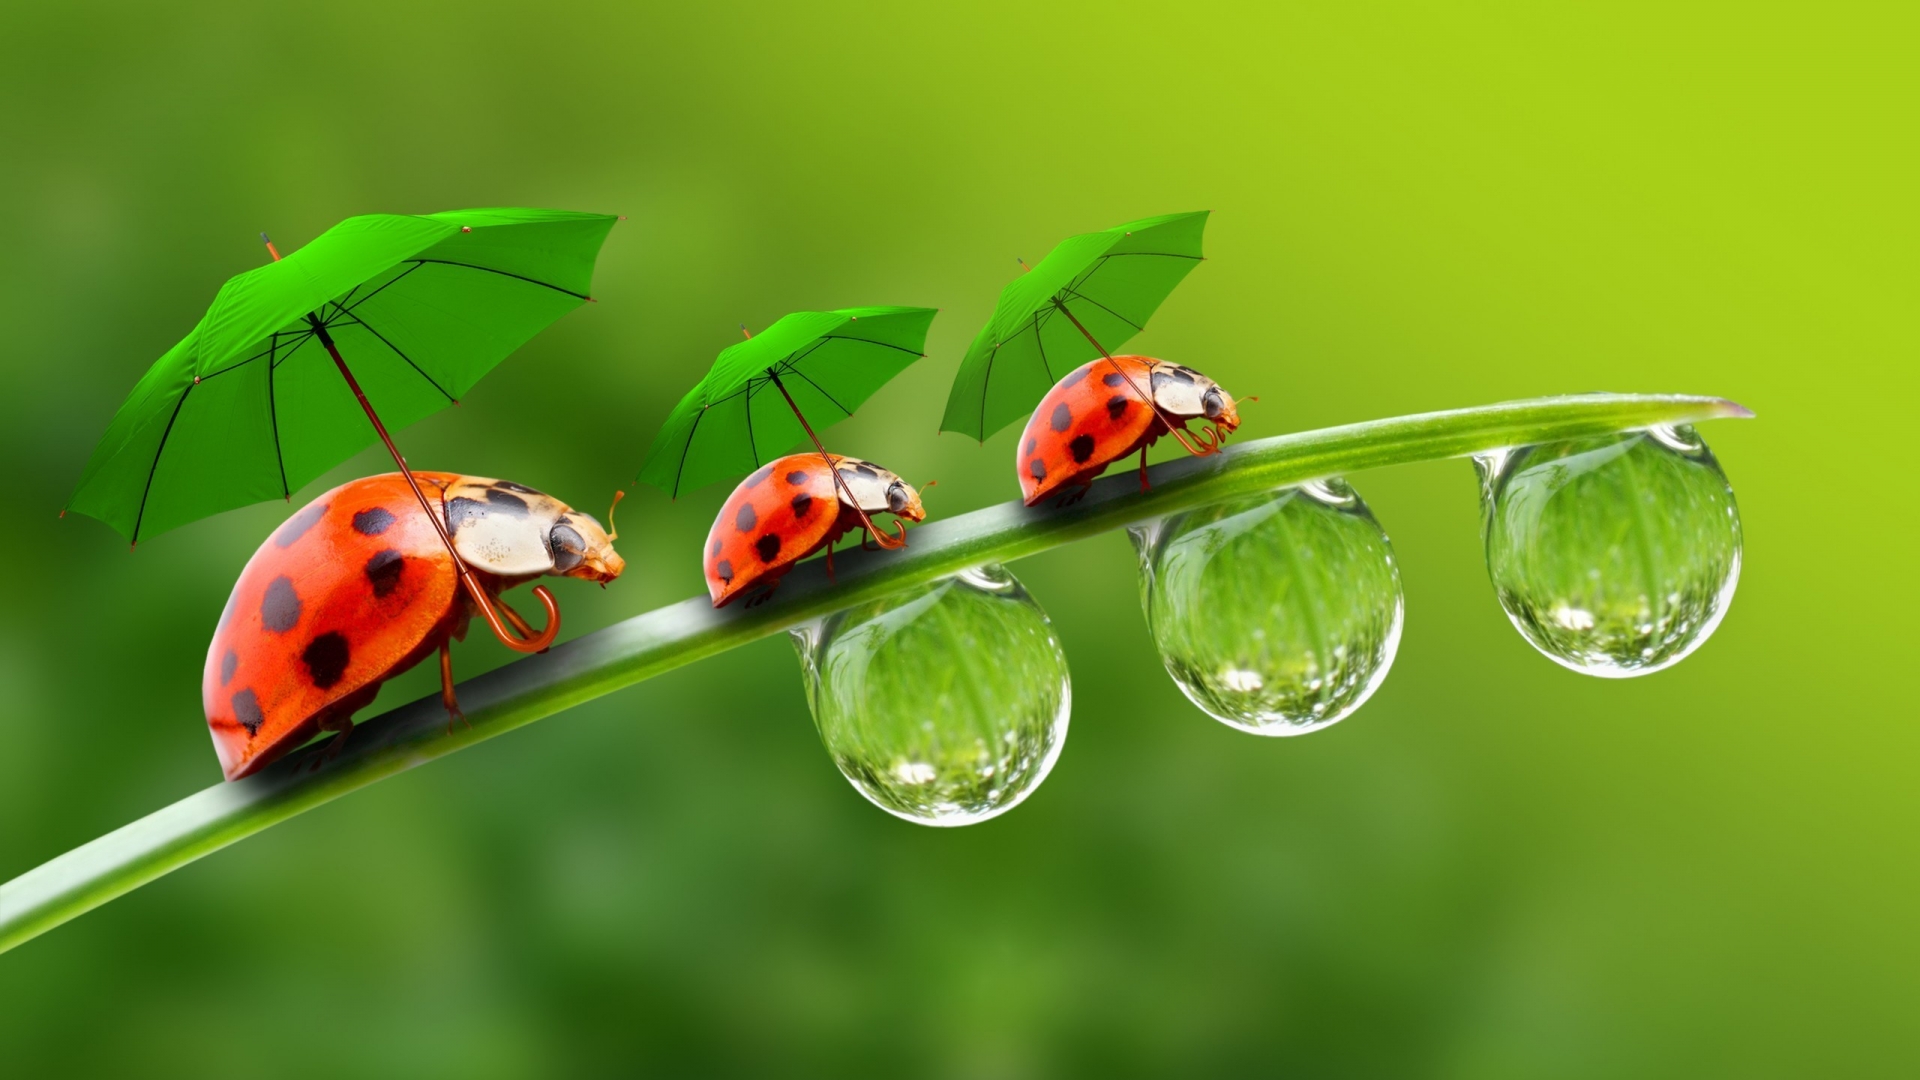 Ladybugs with Umbrellas for 1920 x 1080 HDTV 1080p resolution